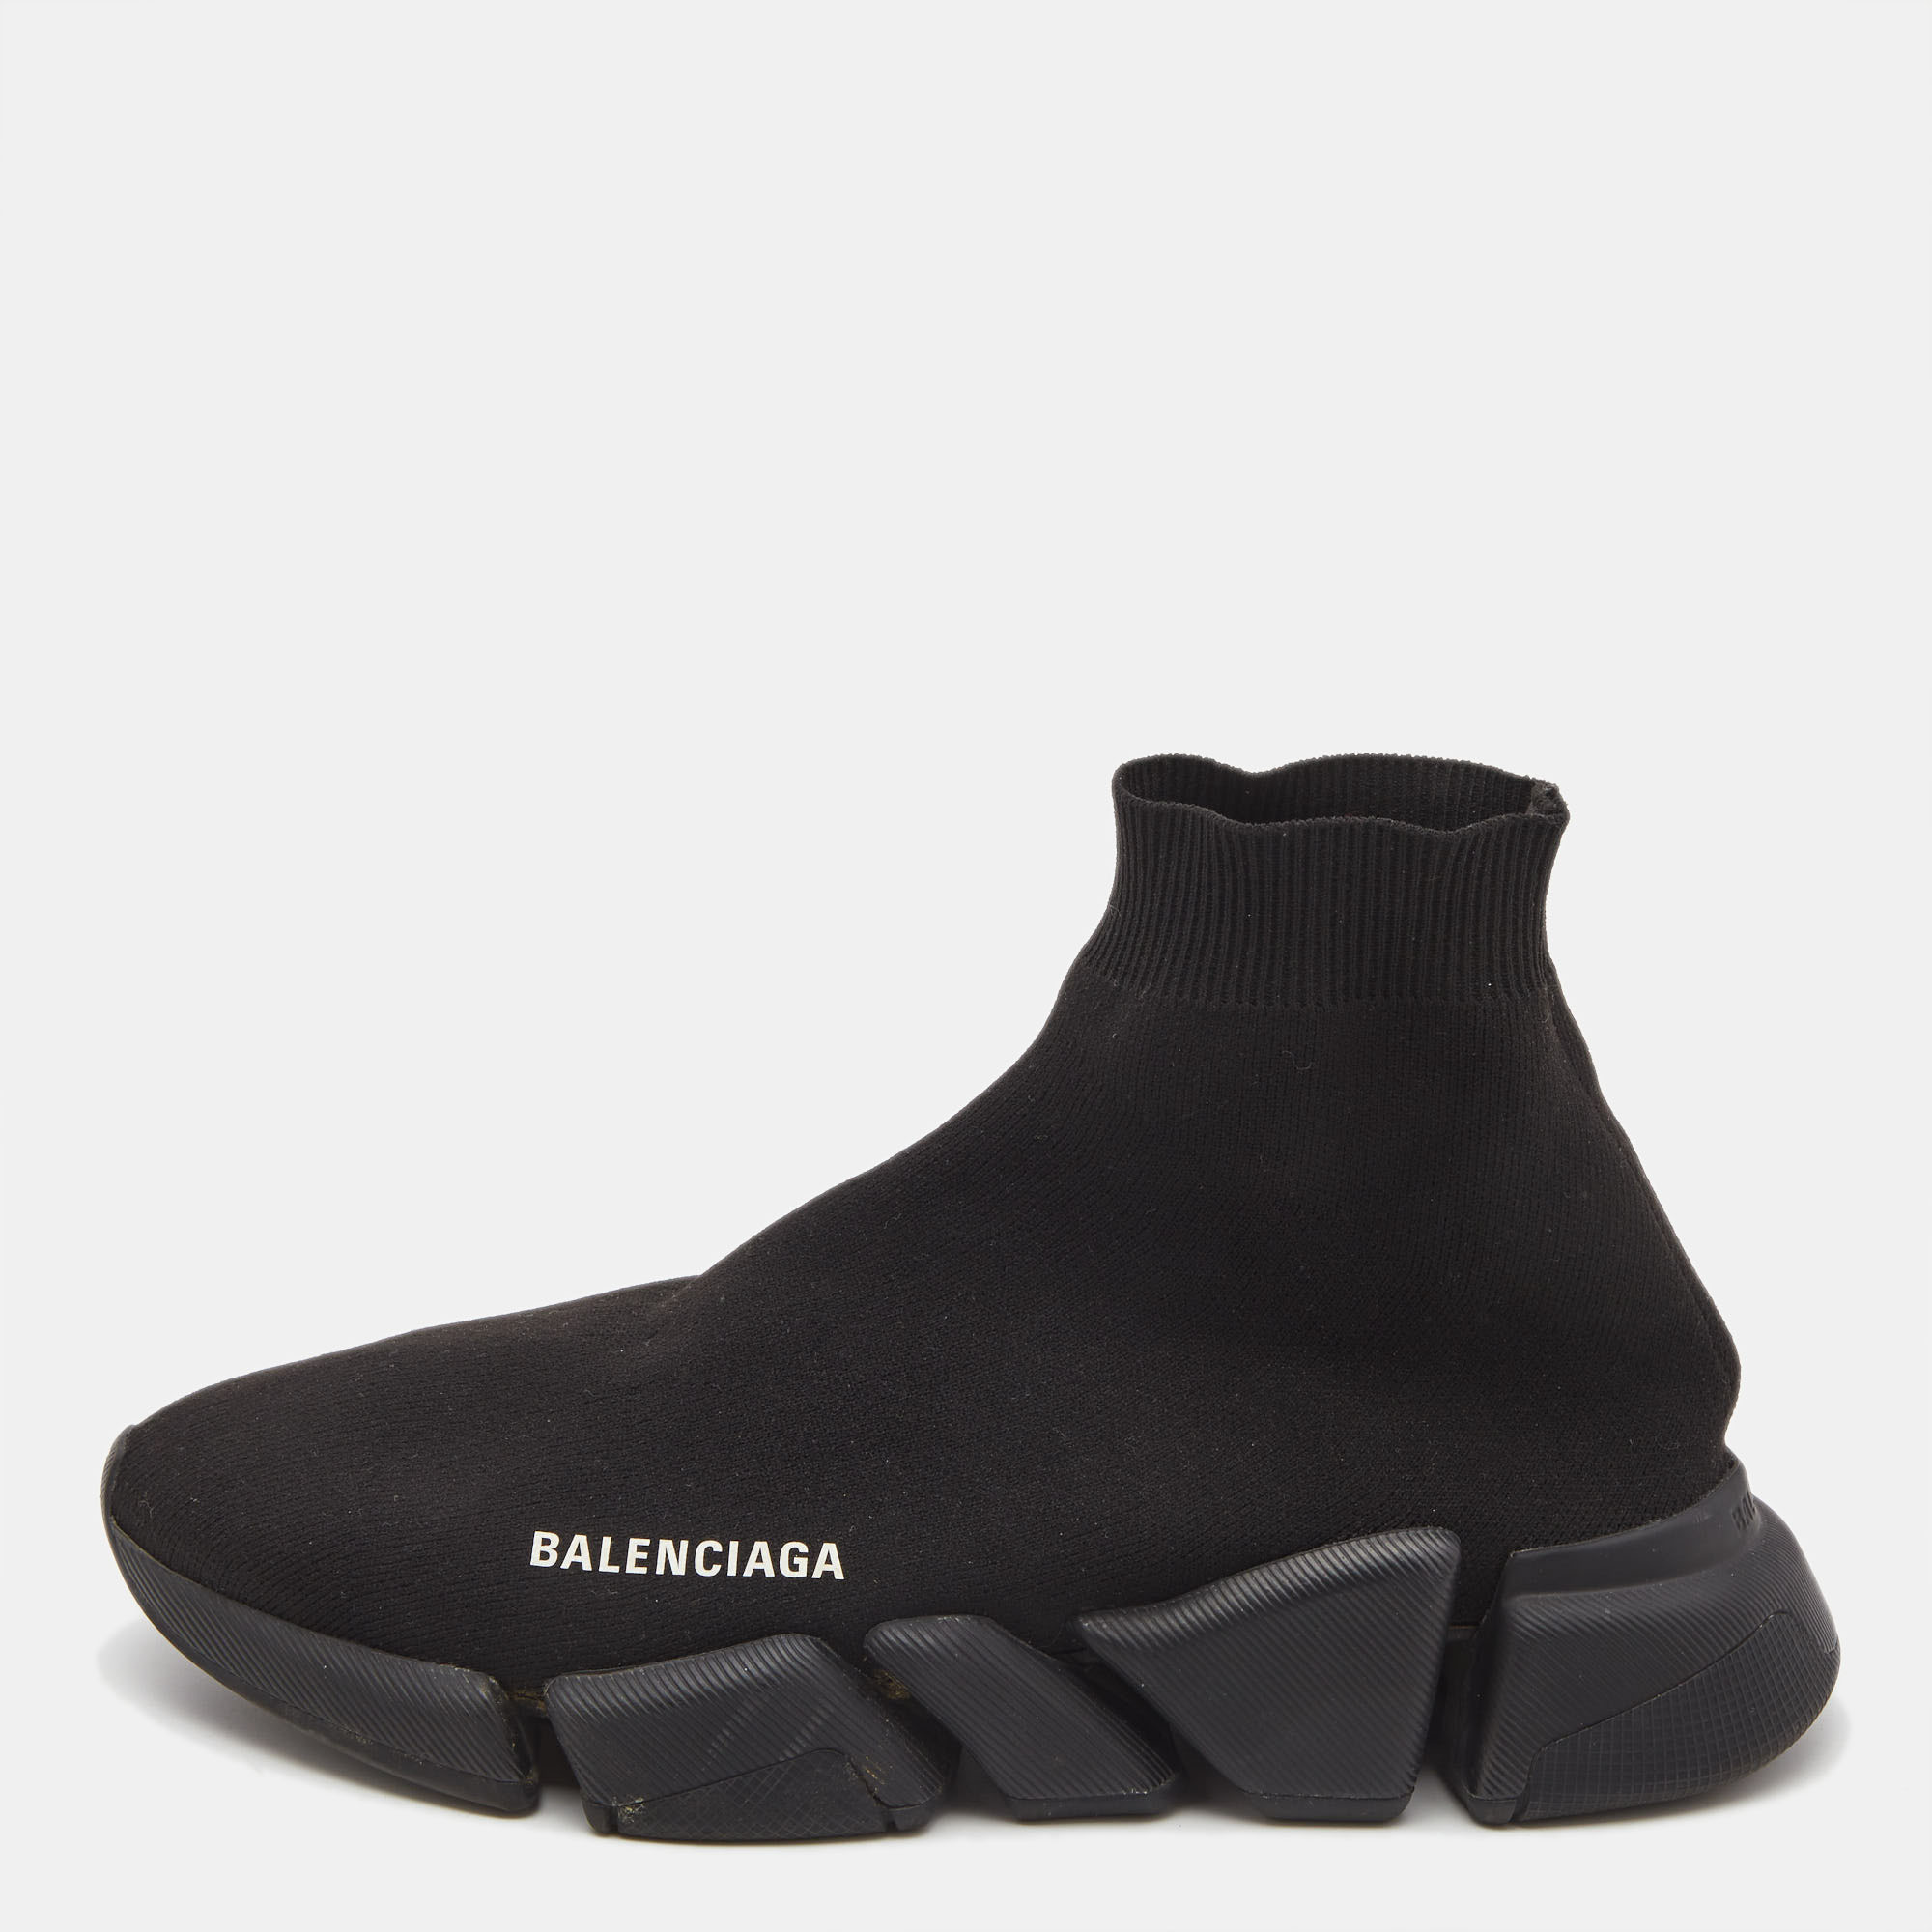 Balenciaga Black Knit Fabric Speed High Top Sneakers Size 40